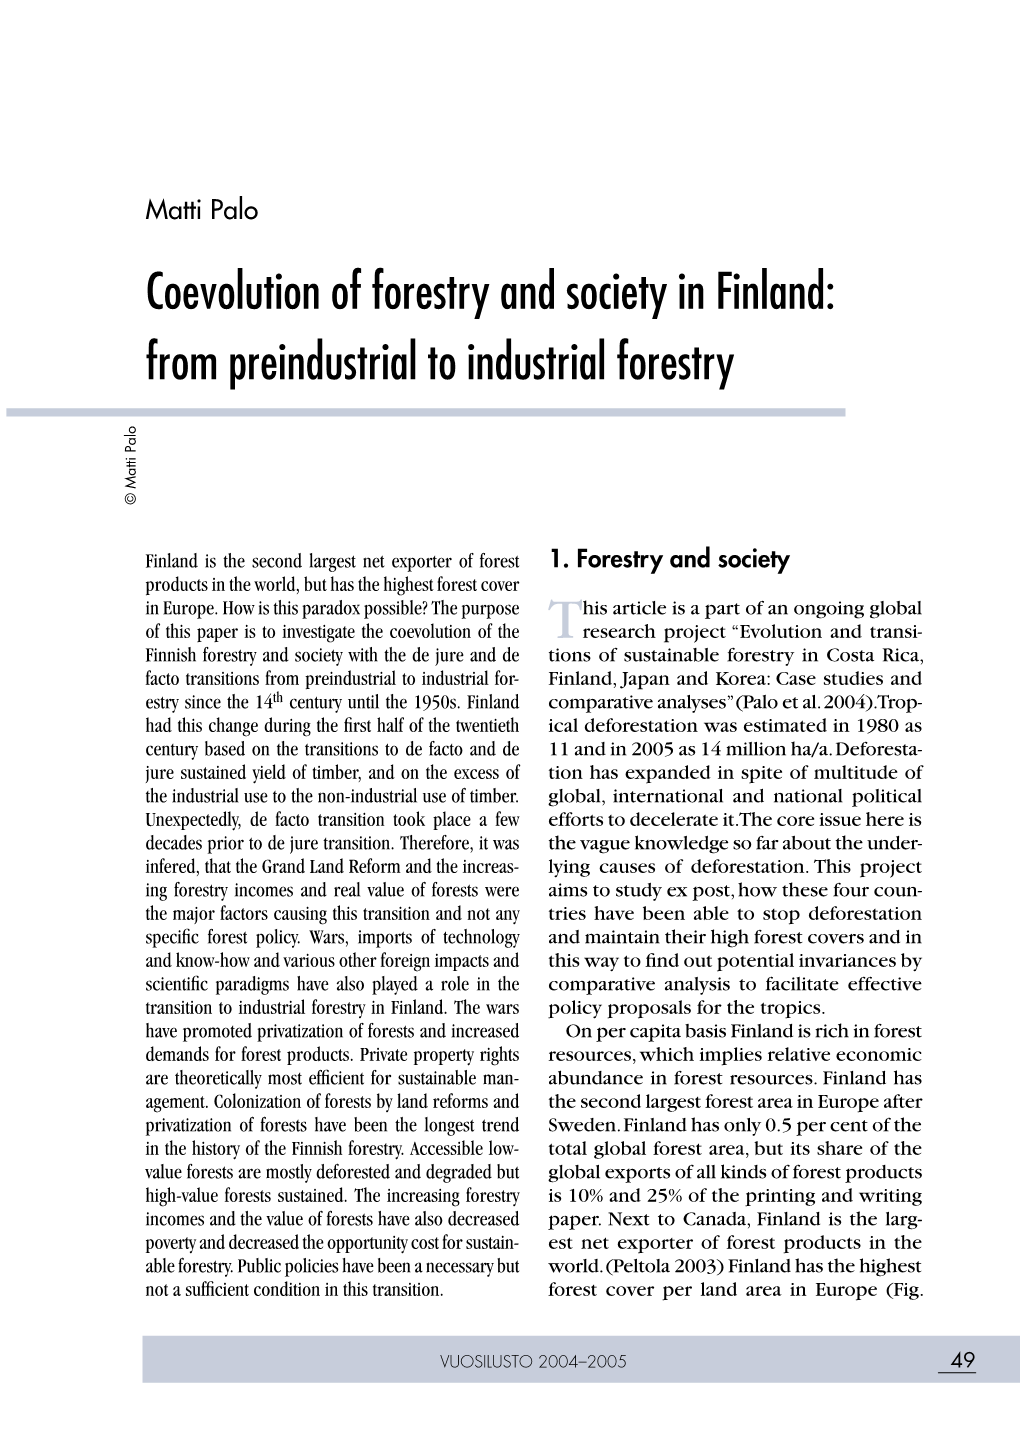 Coevolution of Forestry and Society in Finland: from Preindustrial to Industrial Forestry © Matti Palo